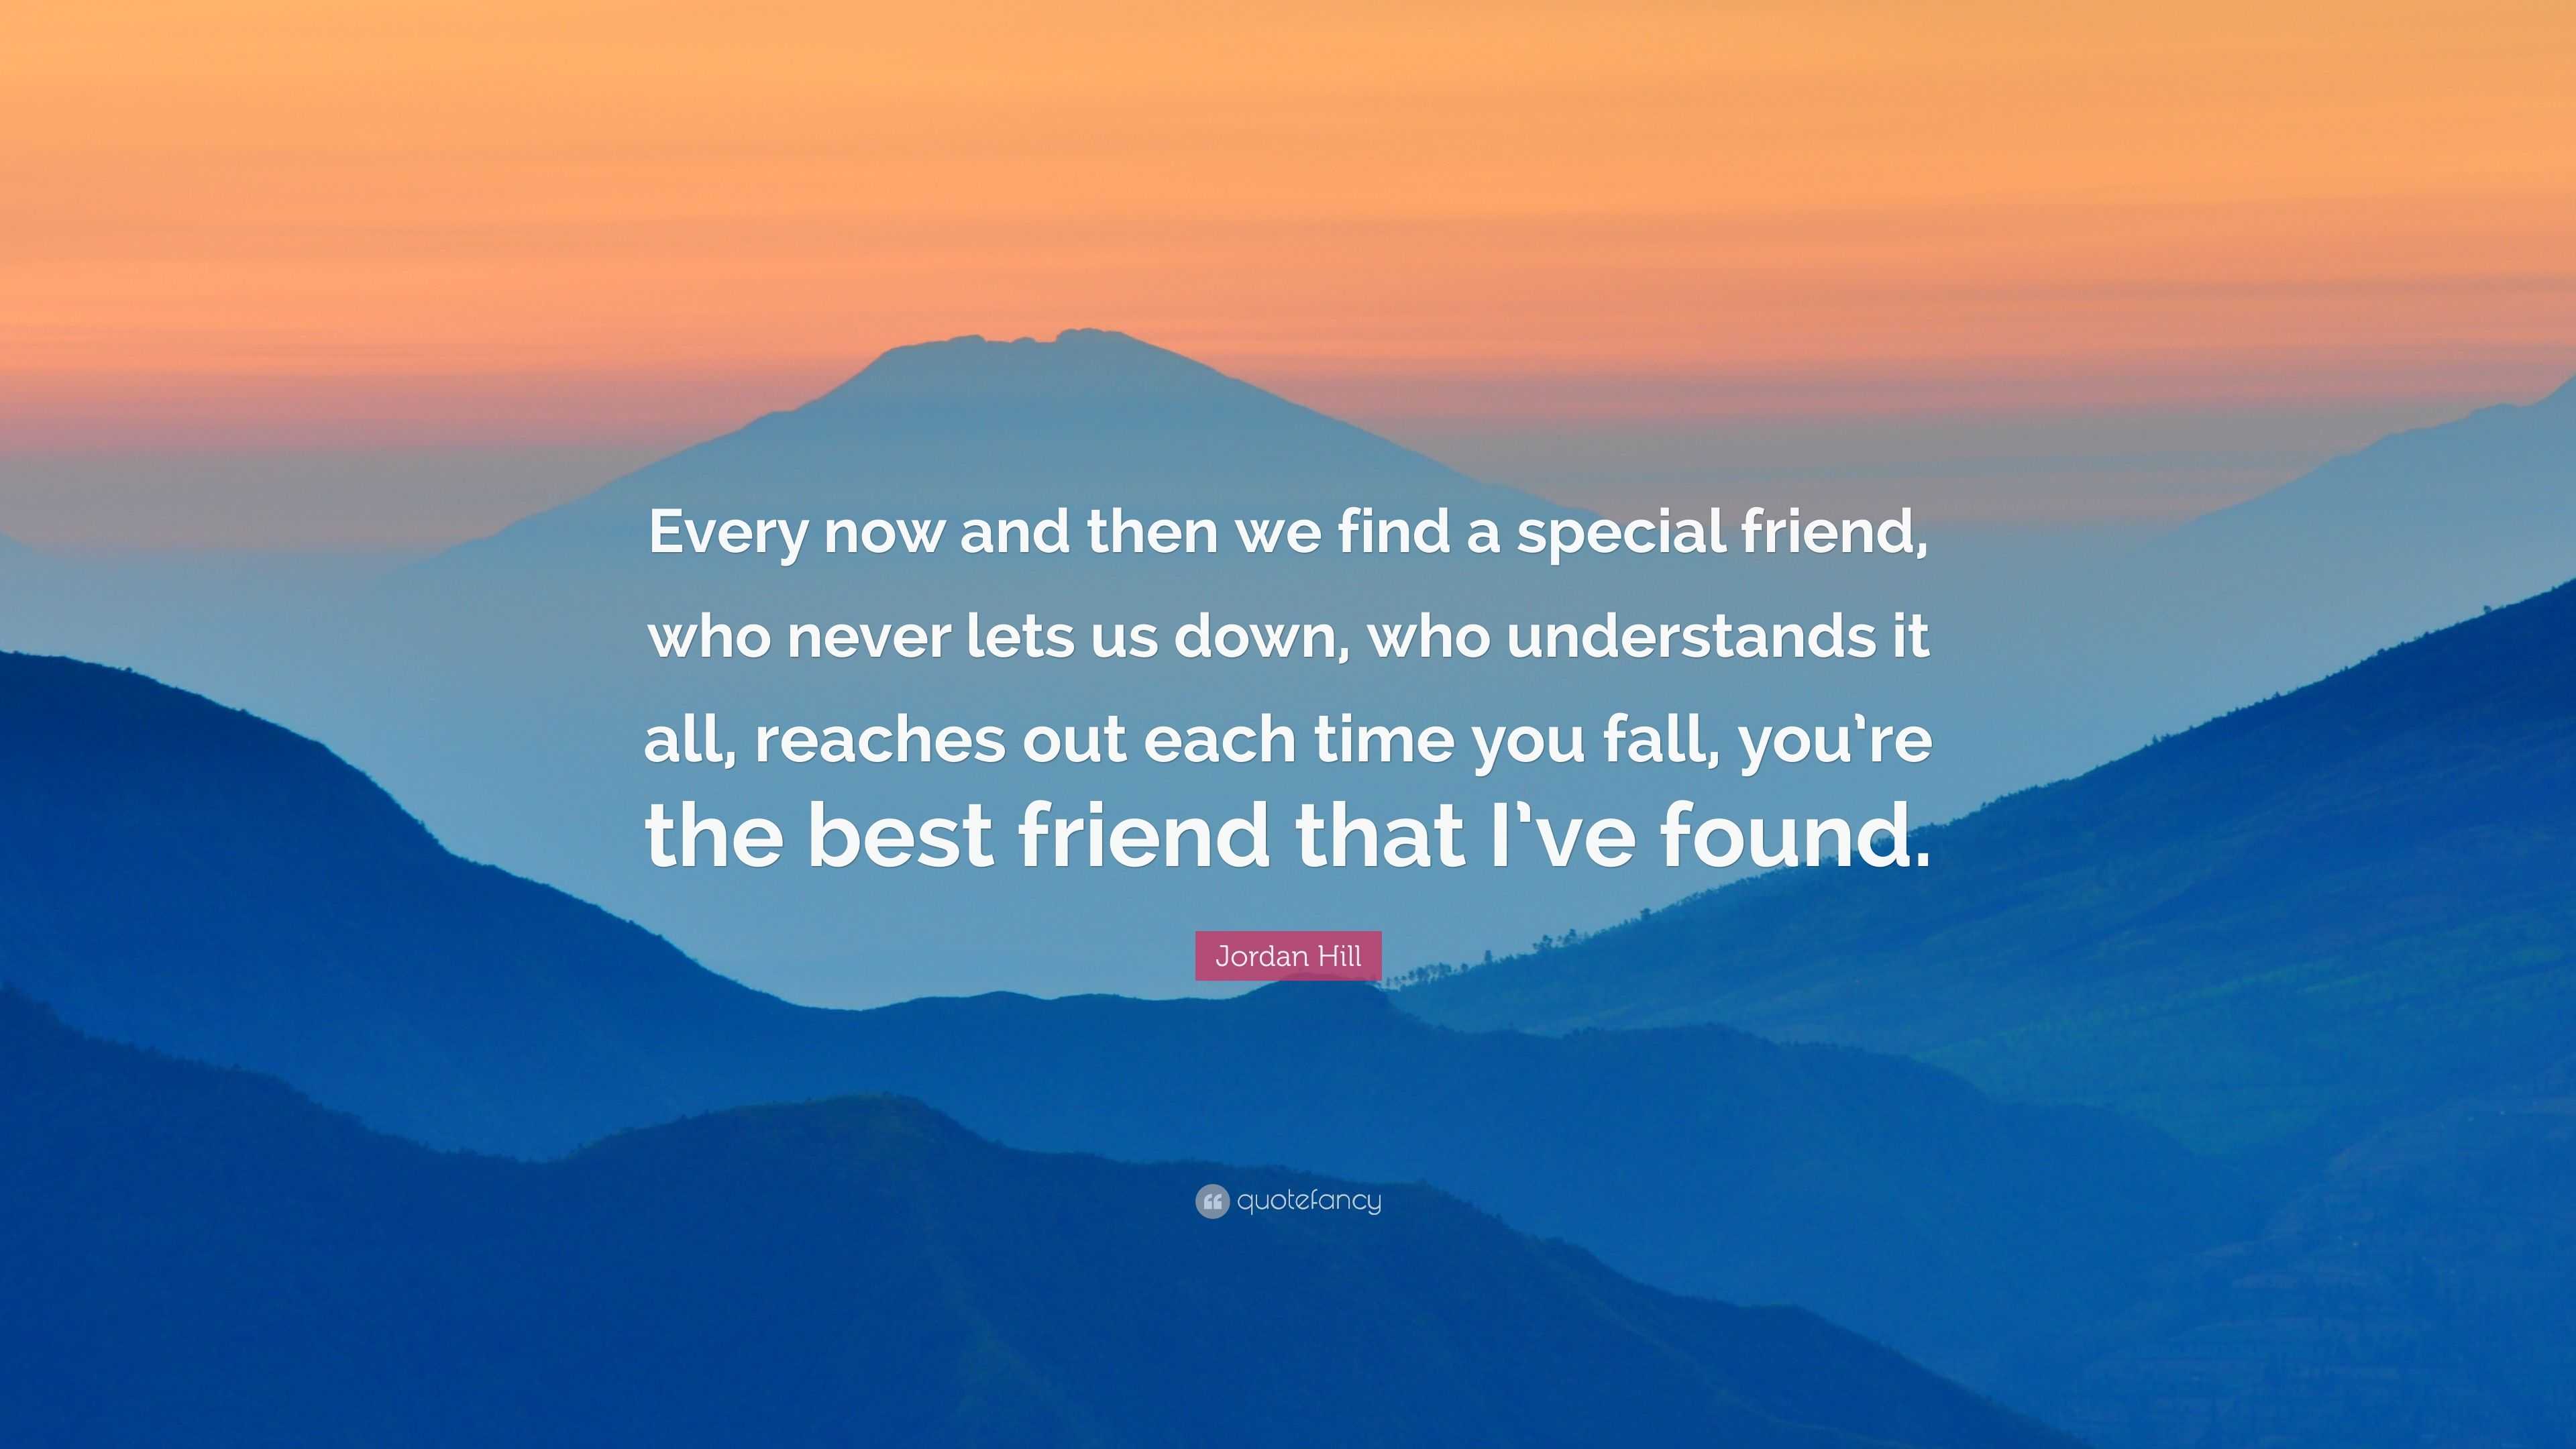 Jordan Hill Quote: “Every now and then we find a special friend, who ...